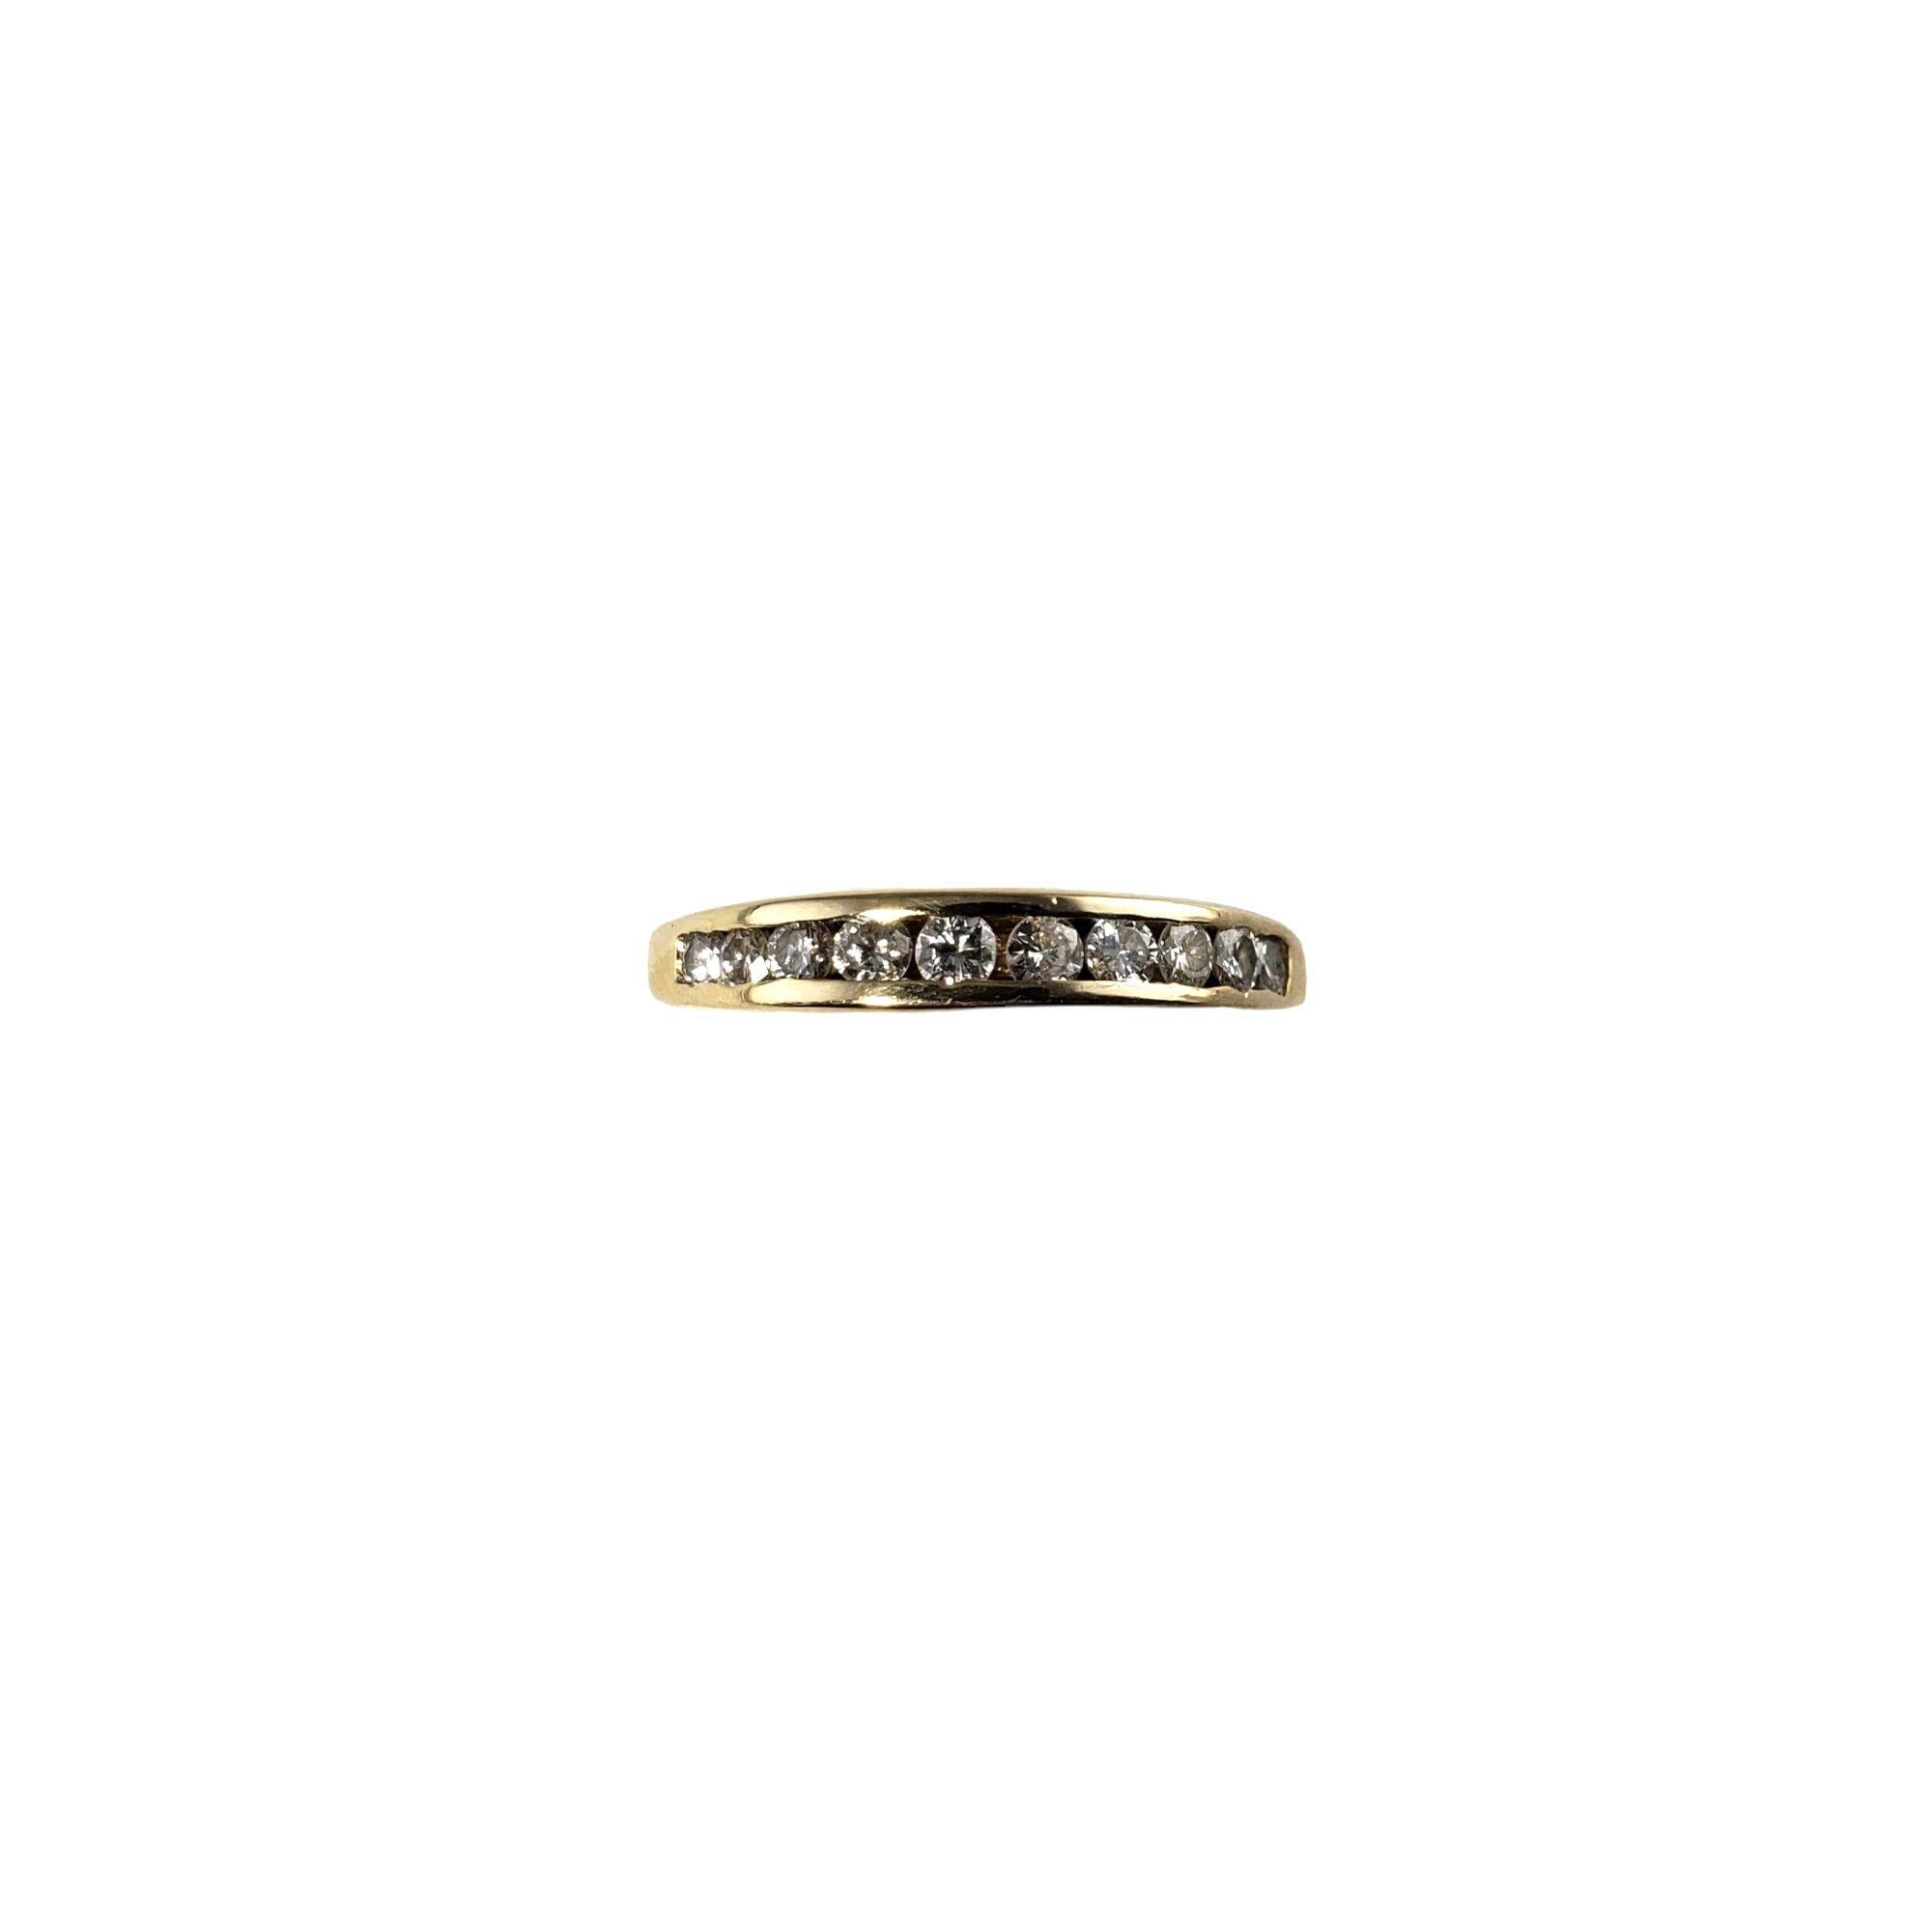 Vintage 14 Karat Yellow Gold Diamond Band Ring Size 6.25-

This sparkling band features nine round brilliant cut diamonds set in classic 14K yellow gold. Width: 3 mm. Shank: 2 mm.

Approximate total diamond weight: .27 ct.

Diamond color: G

Diamond